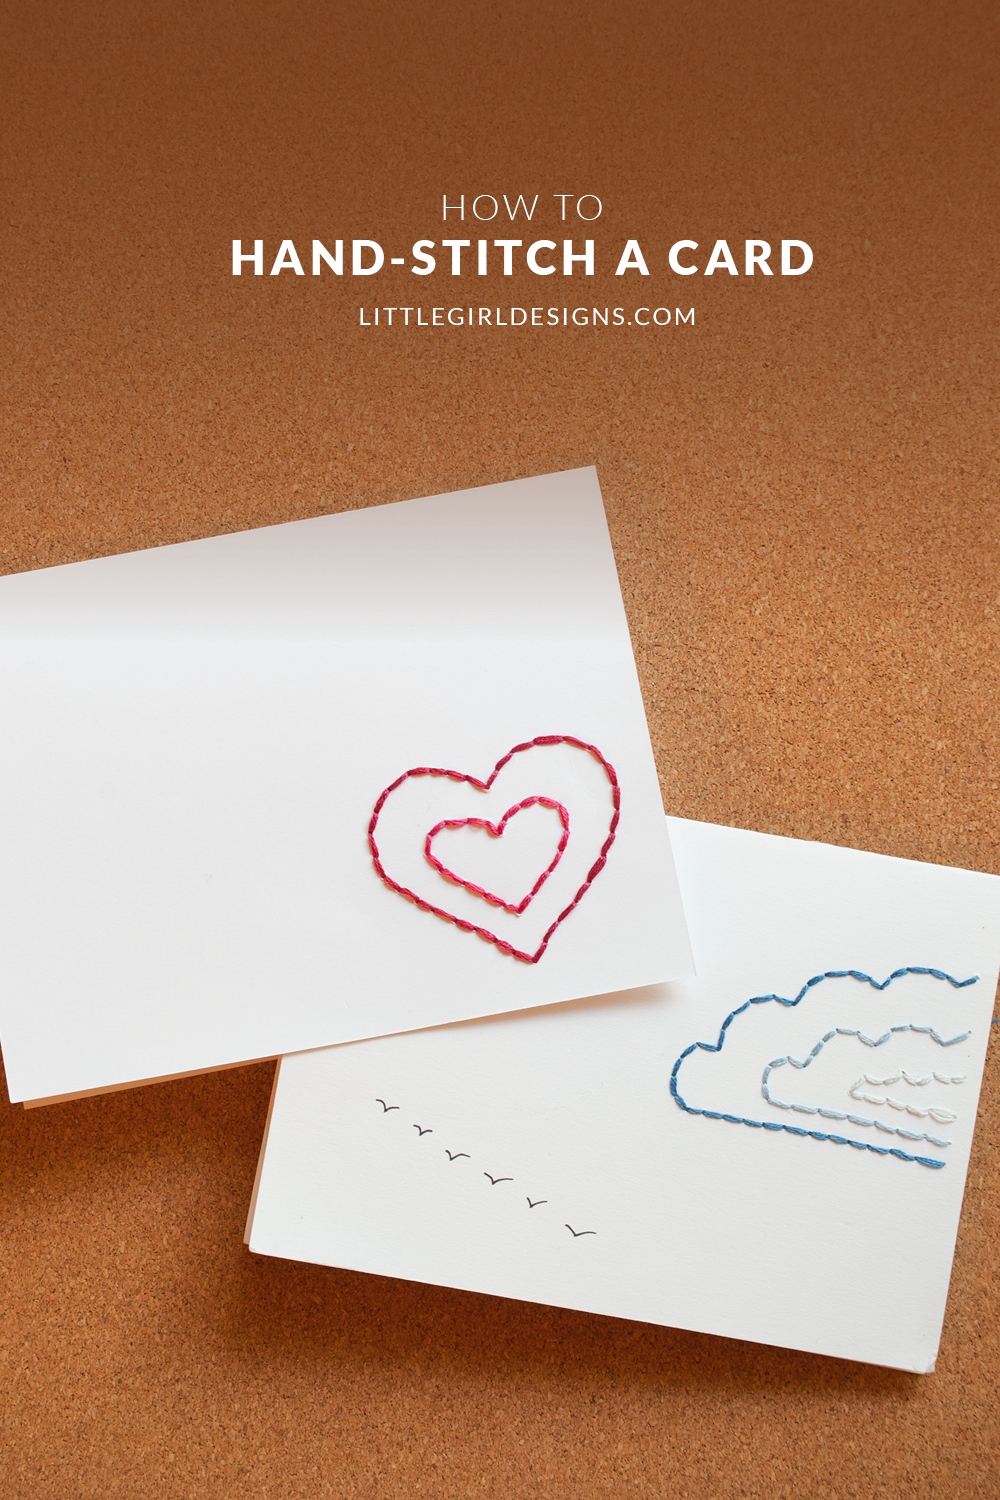 How to Hand-stitch a Card